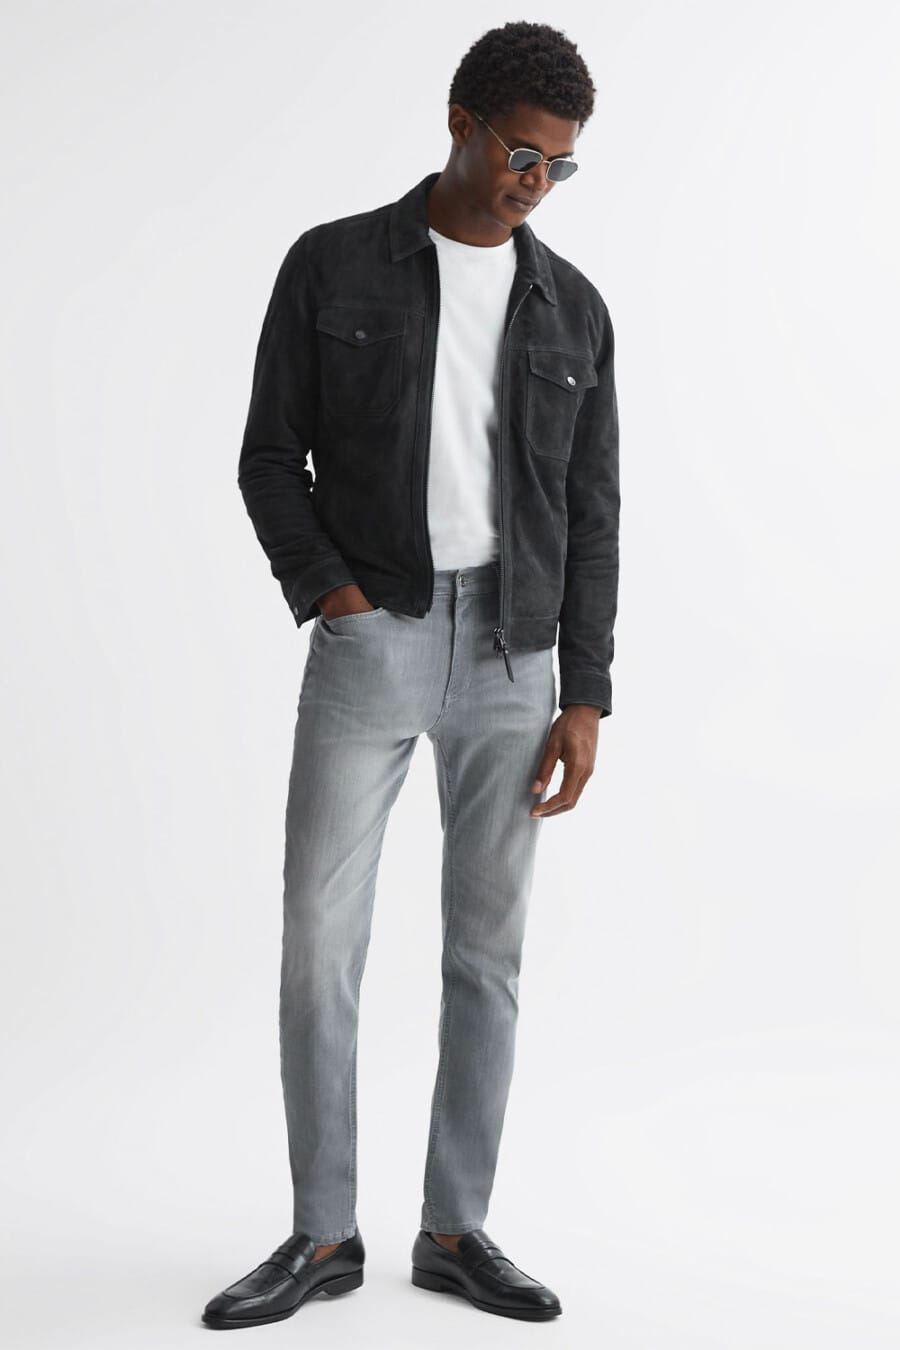 Men's grey jeans, white T-shirt, black suede blouson jacket and sockless black leather penny loafers outfit